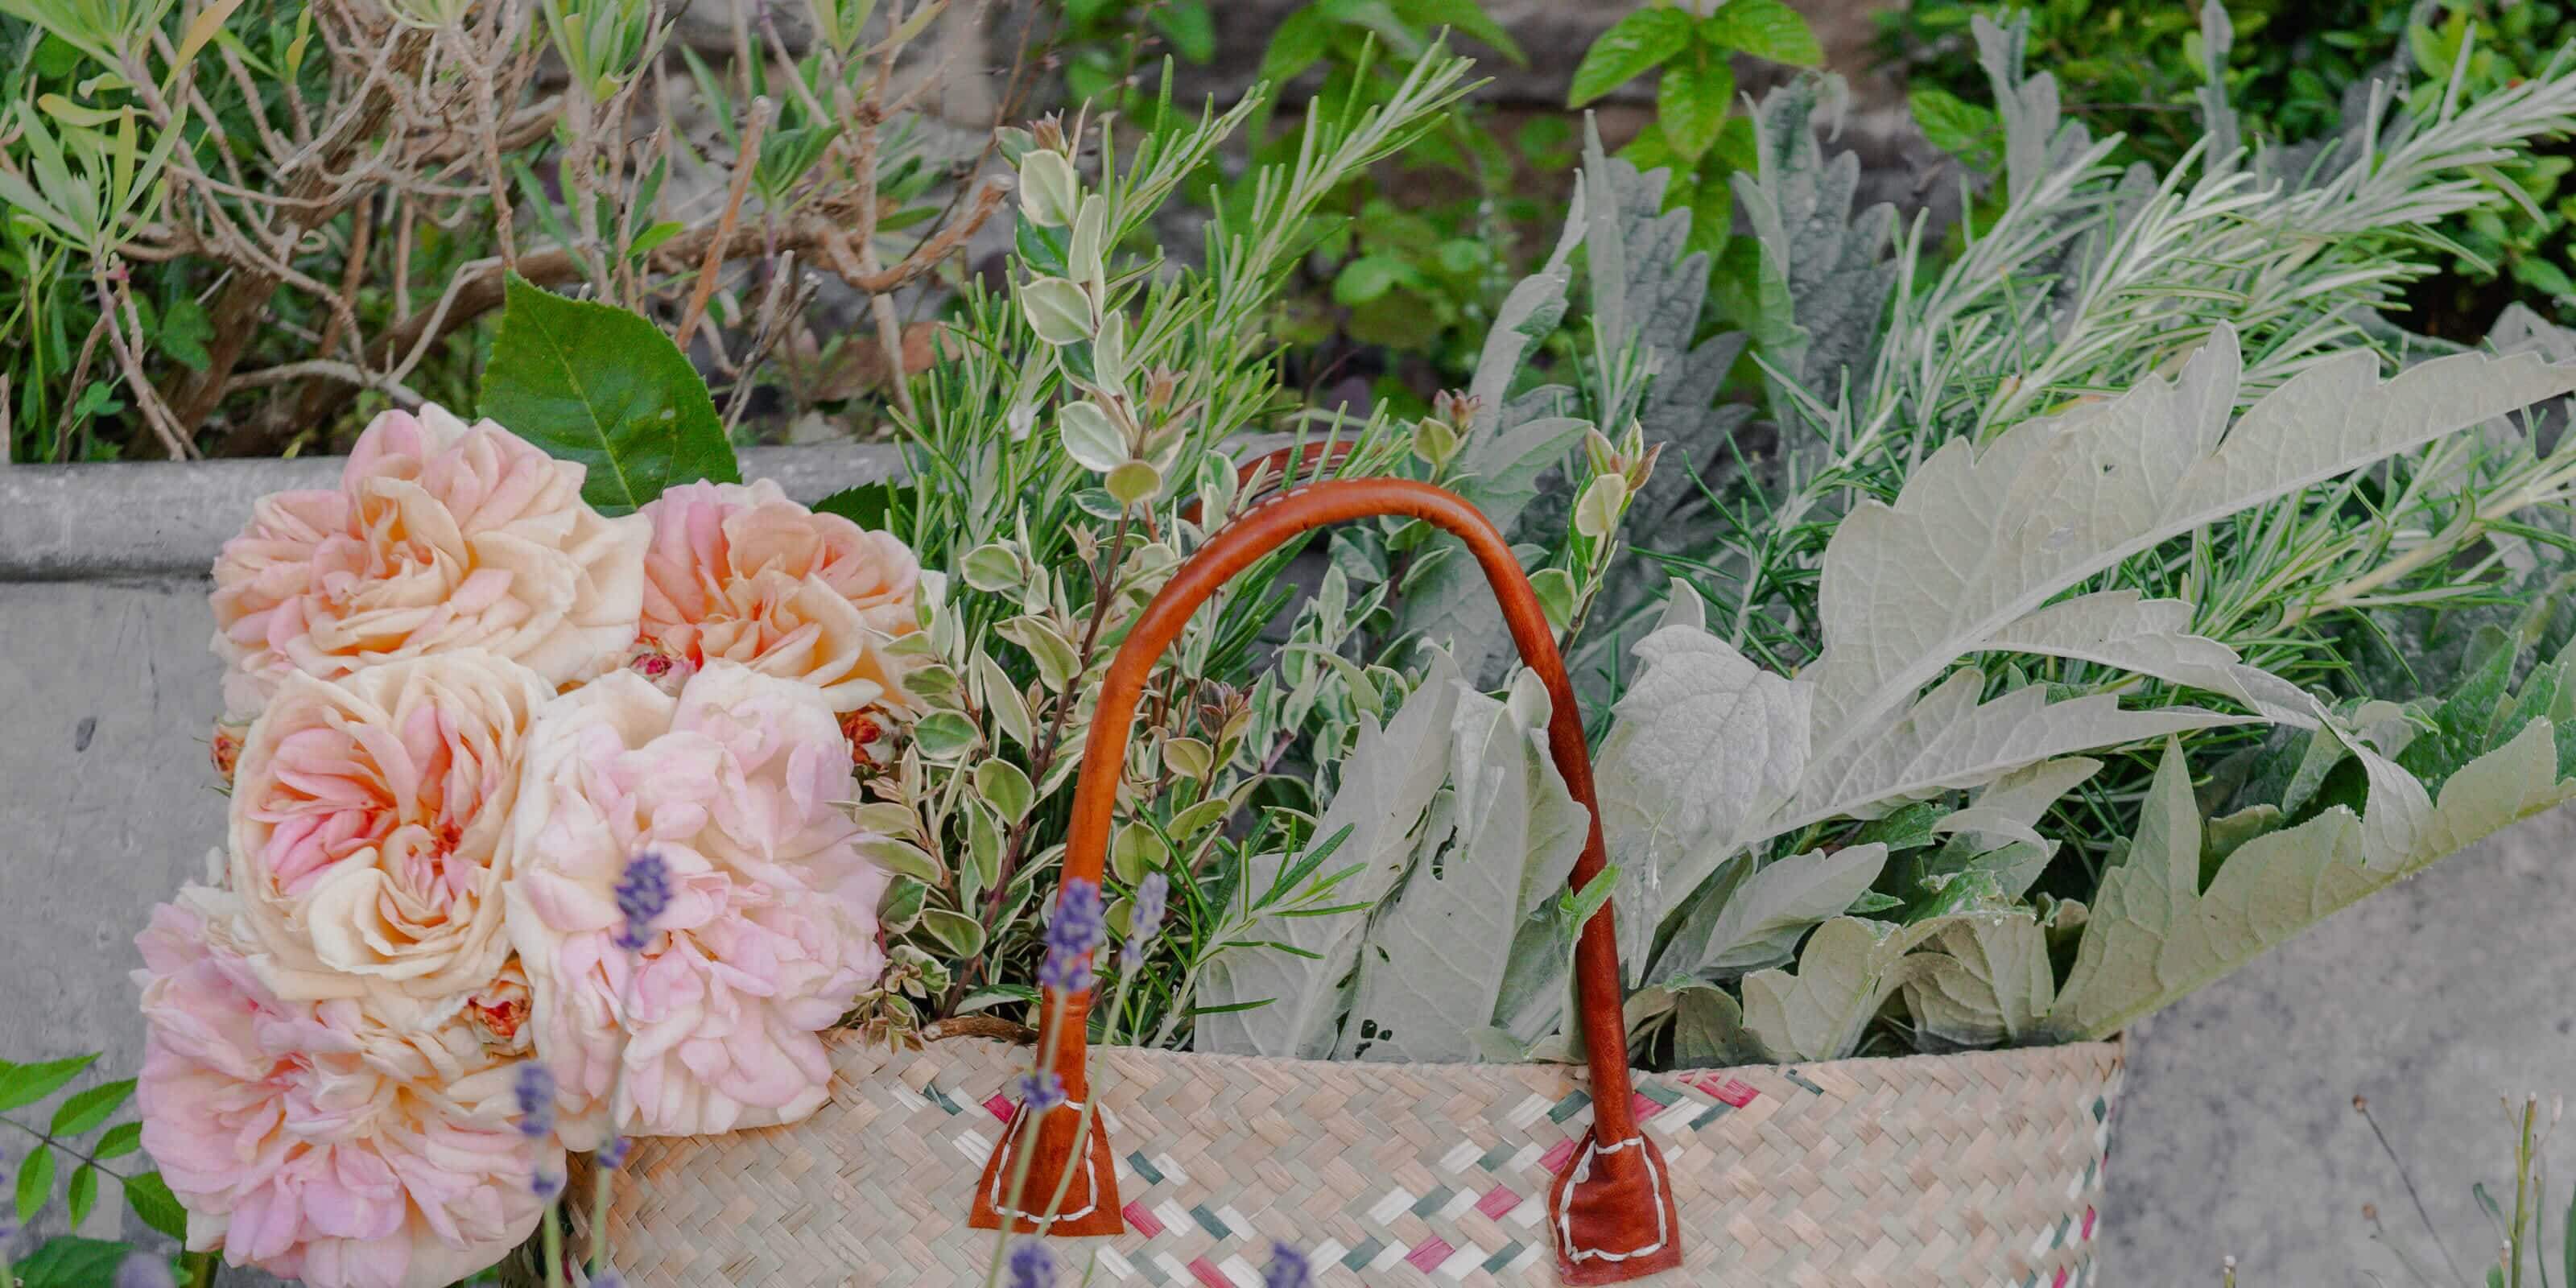 woven bag containing flowers and vegetables